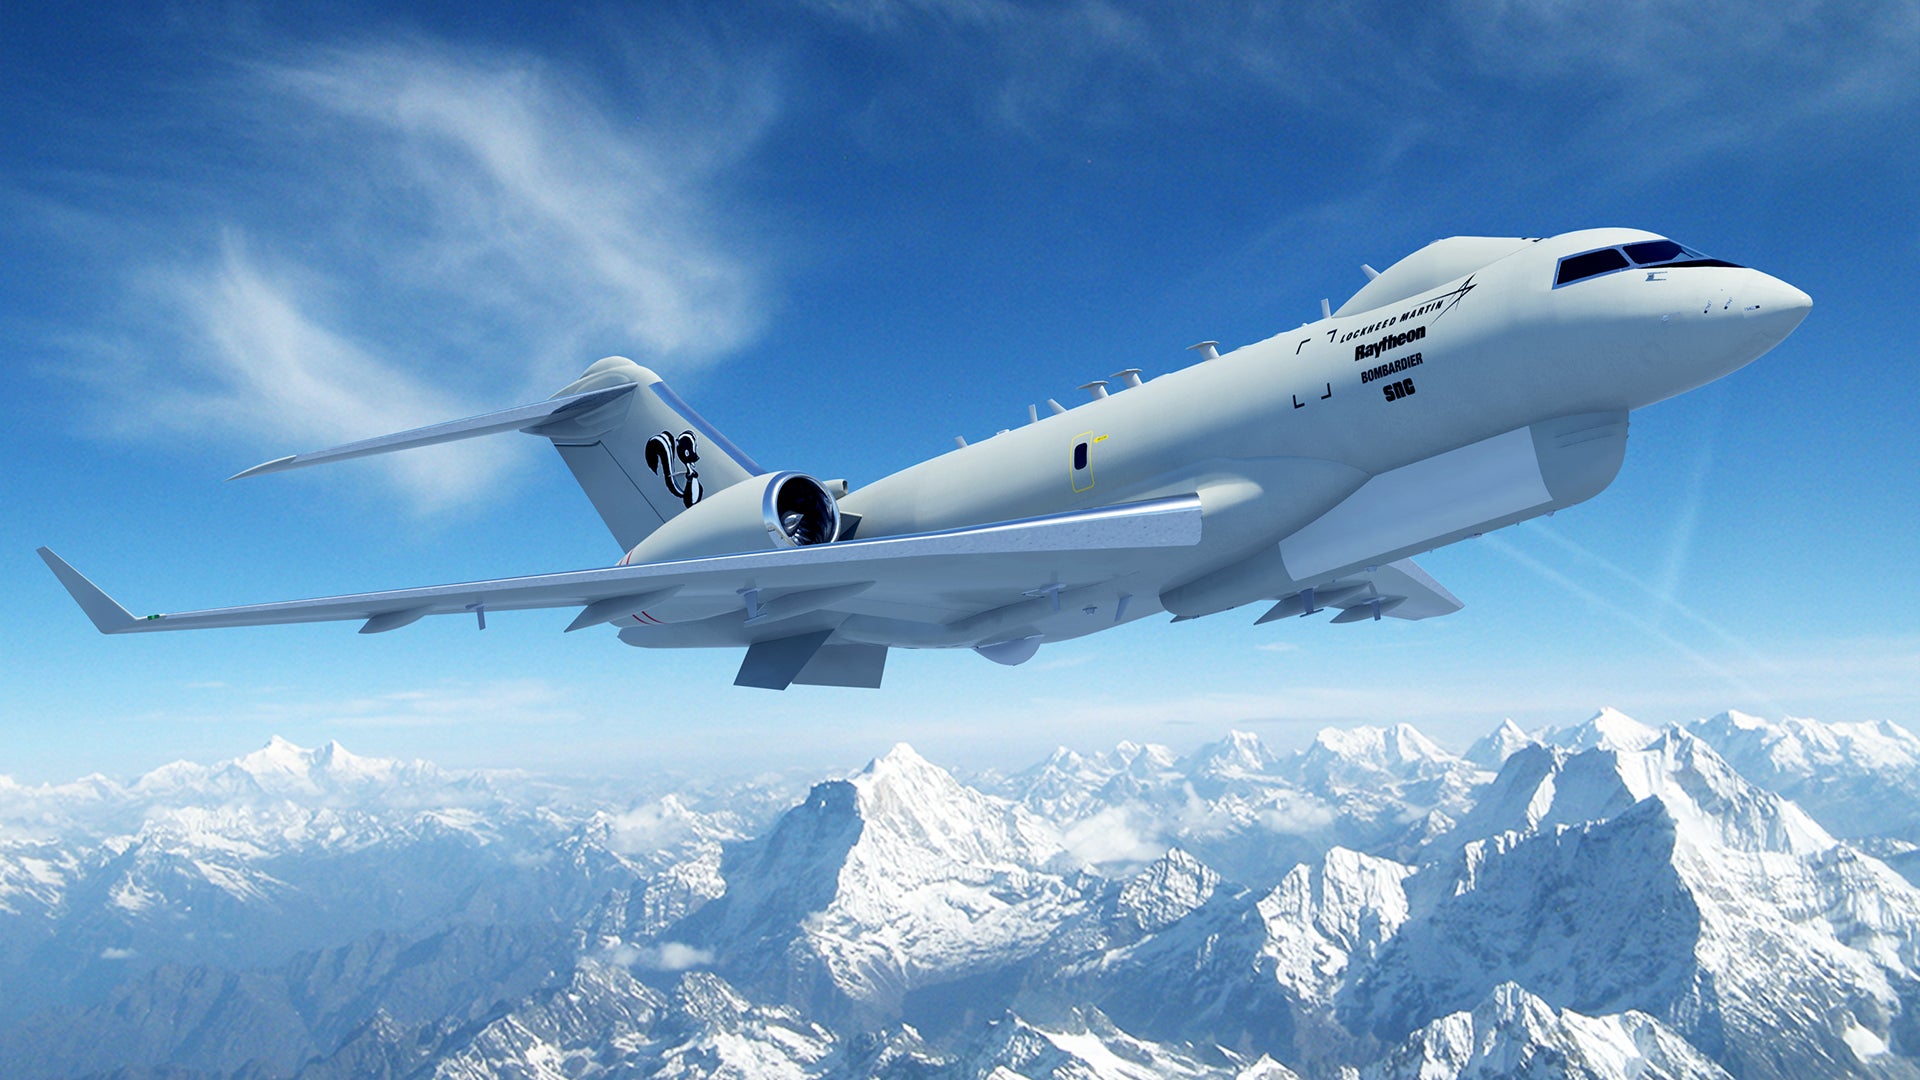 USAF May Dump Its E-8C JSTARS Replacement Program For A Shadowy “Distributed” Solution